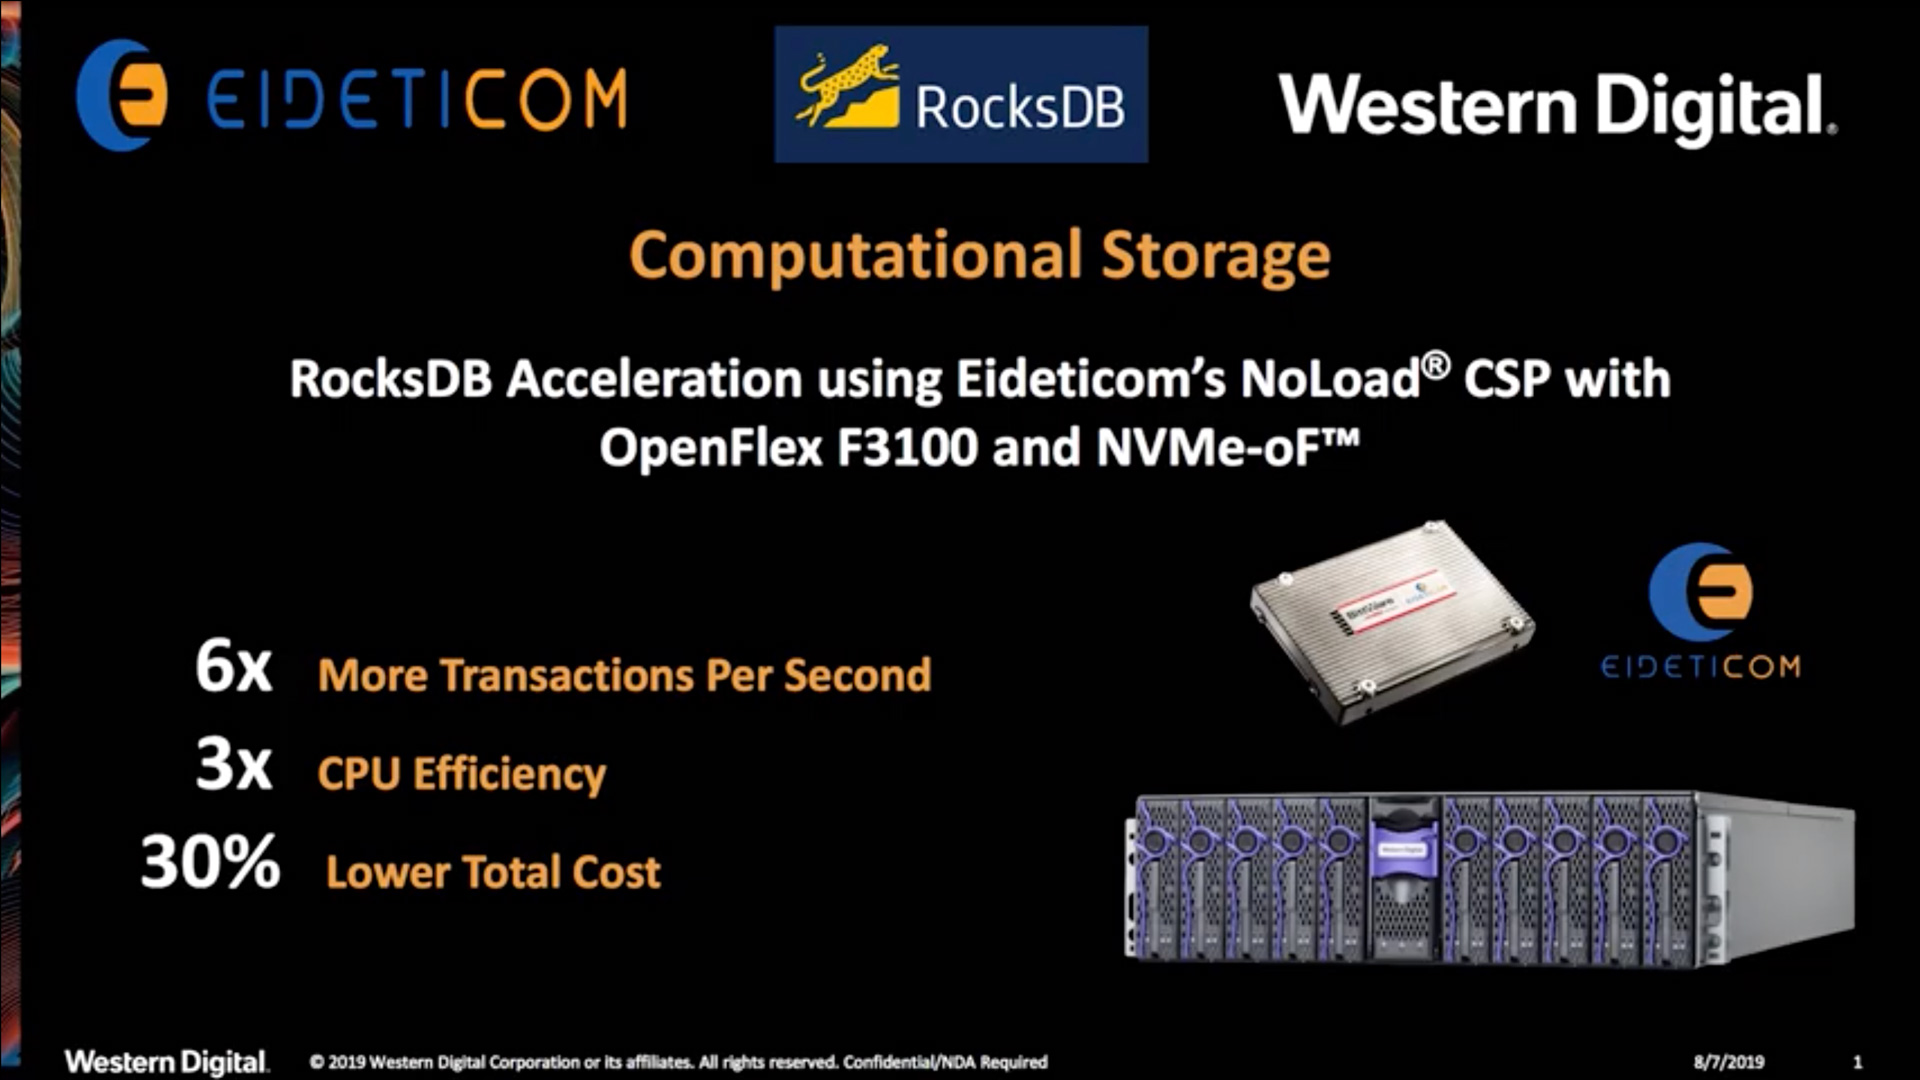 RocksDB Acceleration using Eideticom’s NoLoad® CSP with OpenFlex F3100 and NVMe-oF™